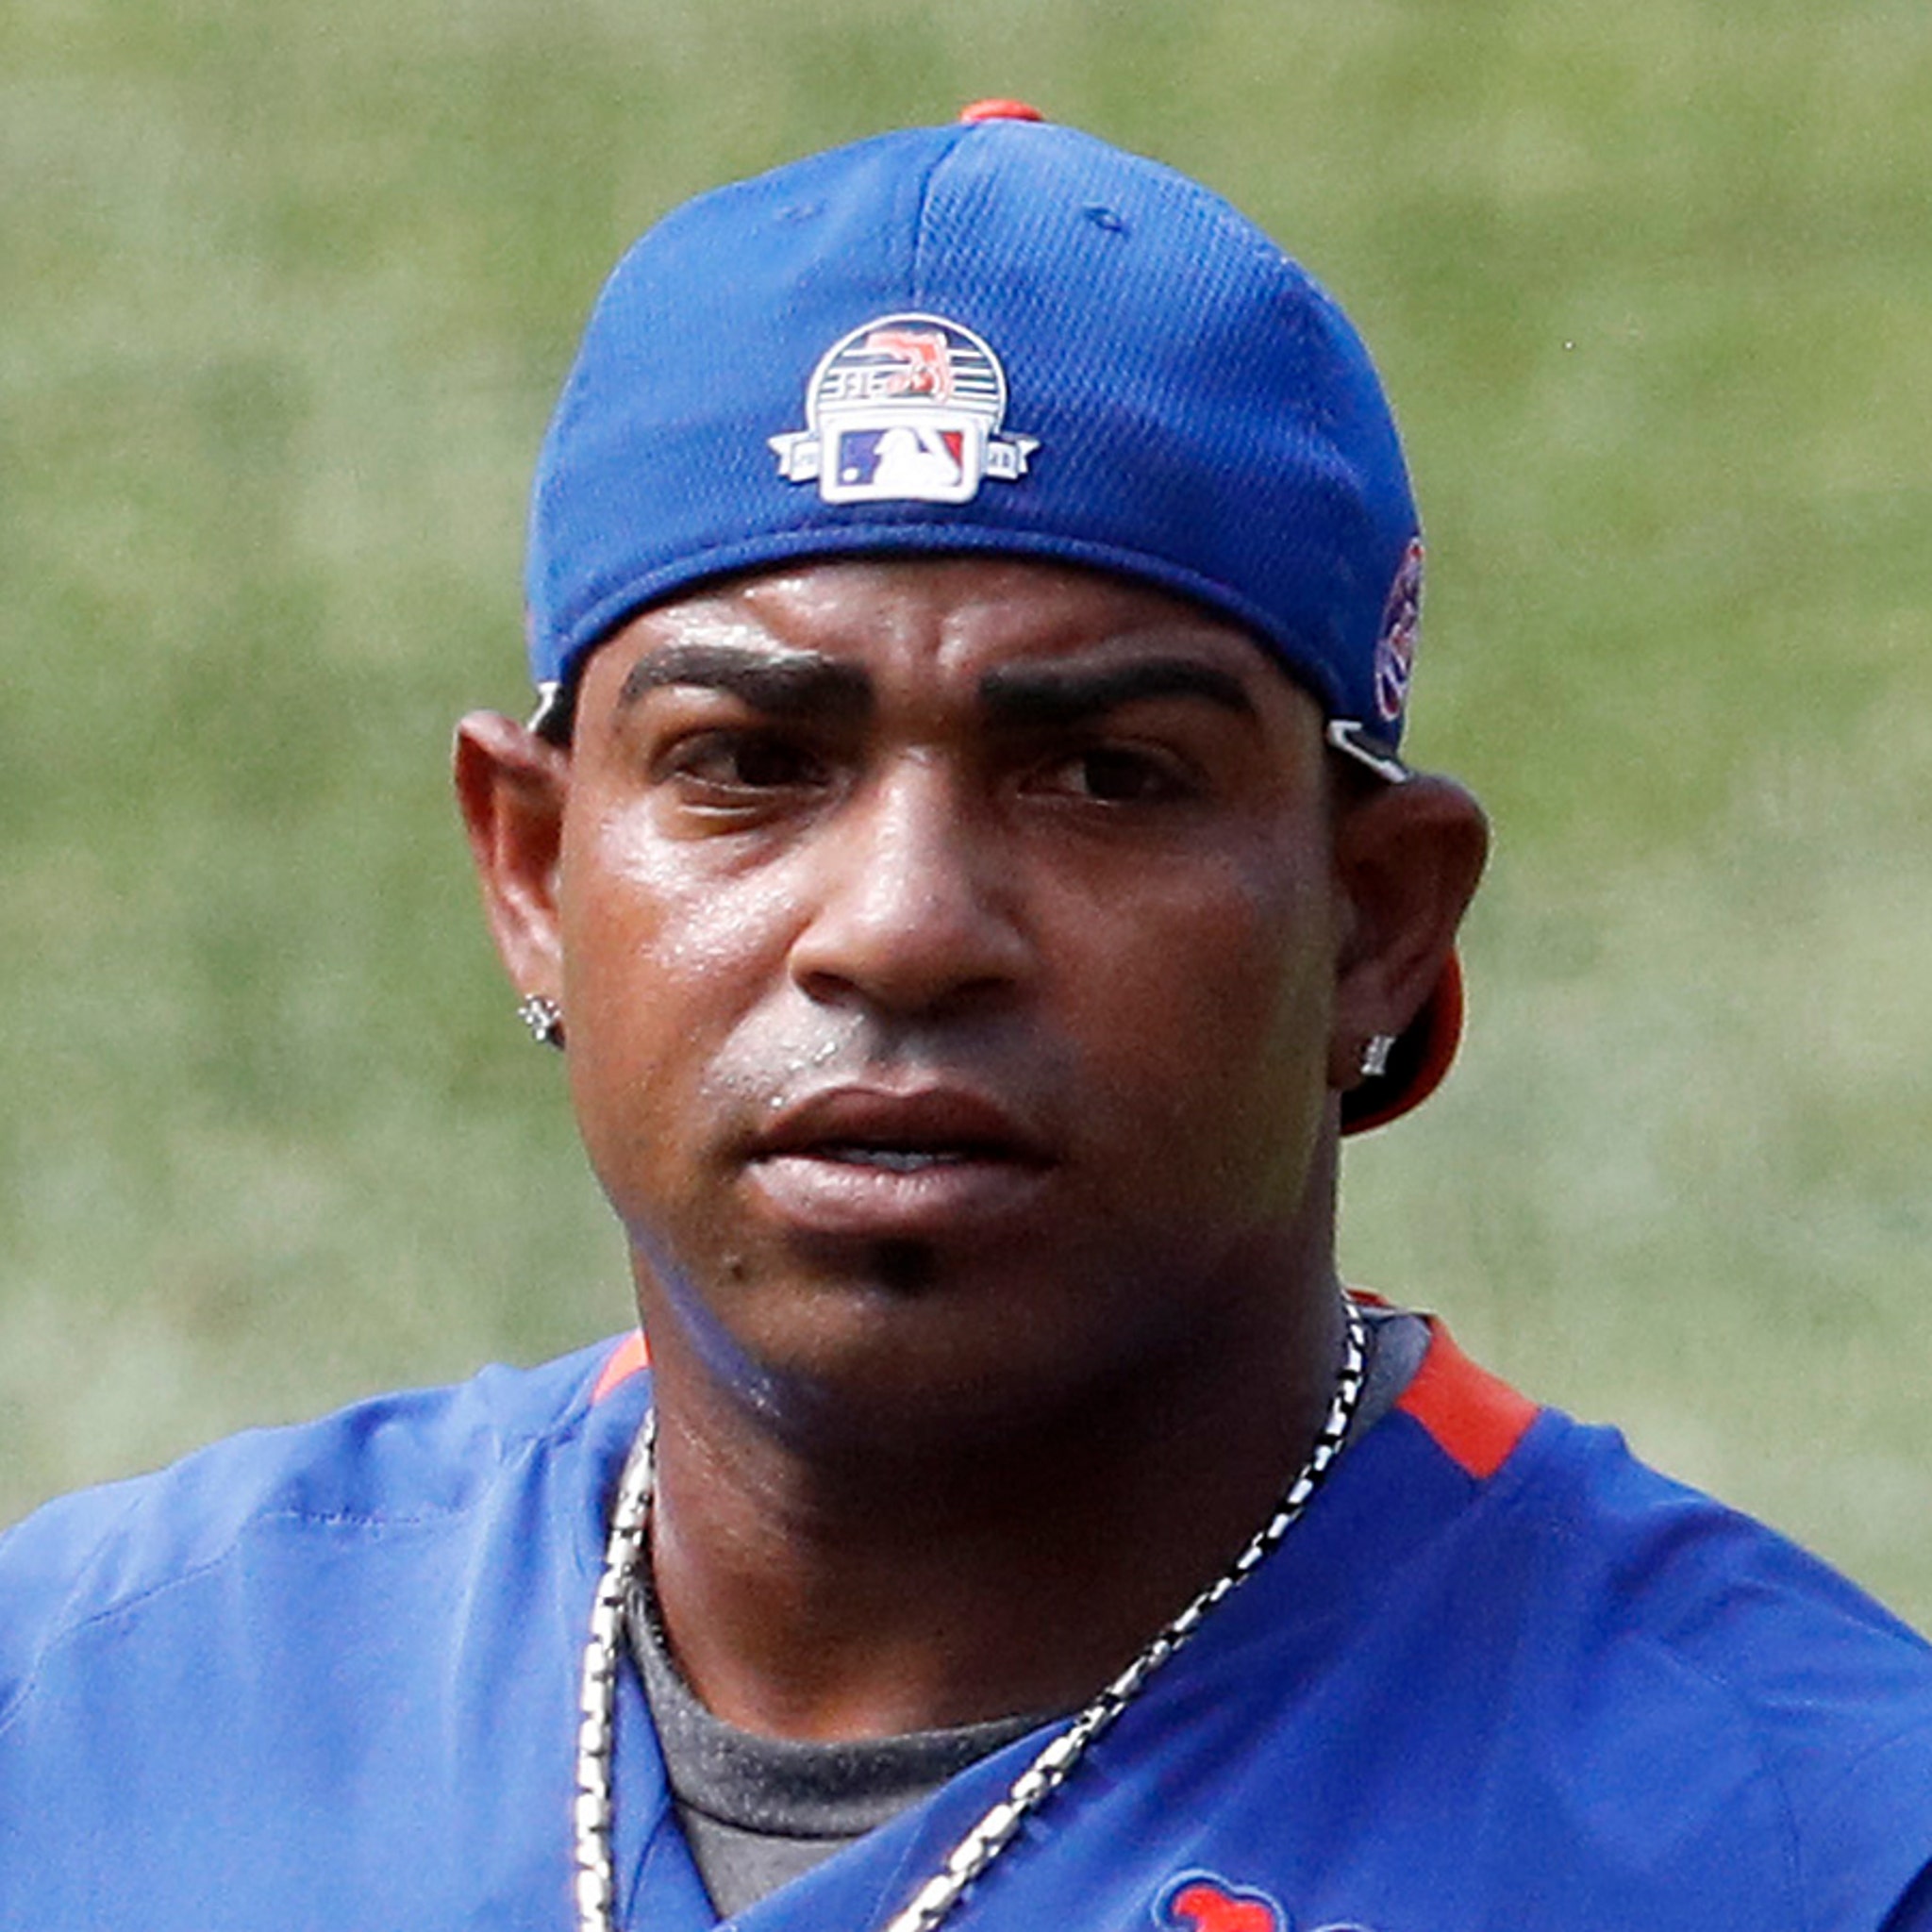 New York Mets Yoenis Cespedes Is Opting Out of the 2020 Season